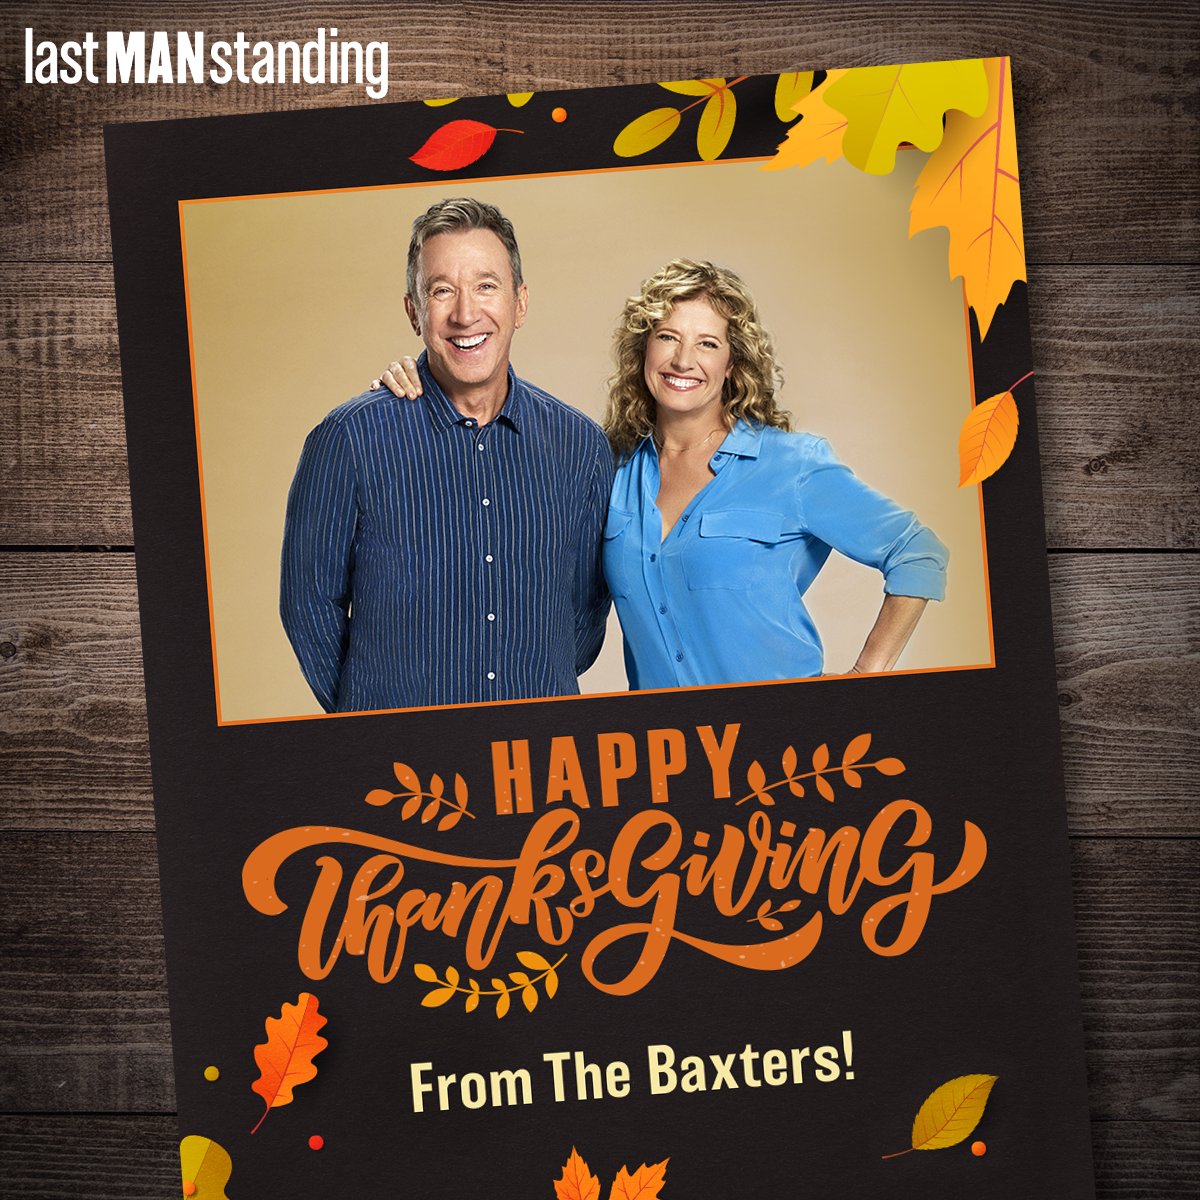 A very Happy Thanksgiving to you and your loved ones, from The Baxters! 🦃🧡 Last Man Standing is now streaming on Hulu hulu.tv/LastManStanding